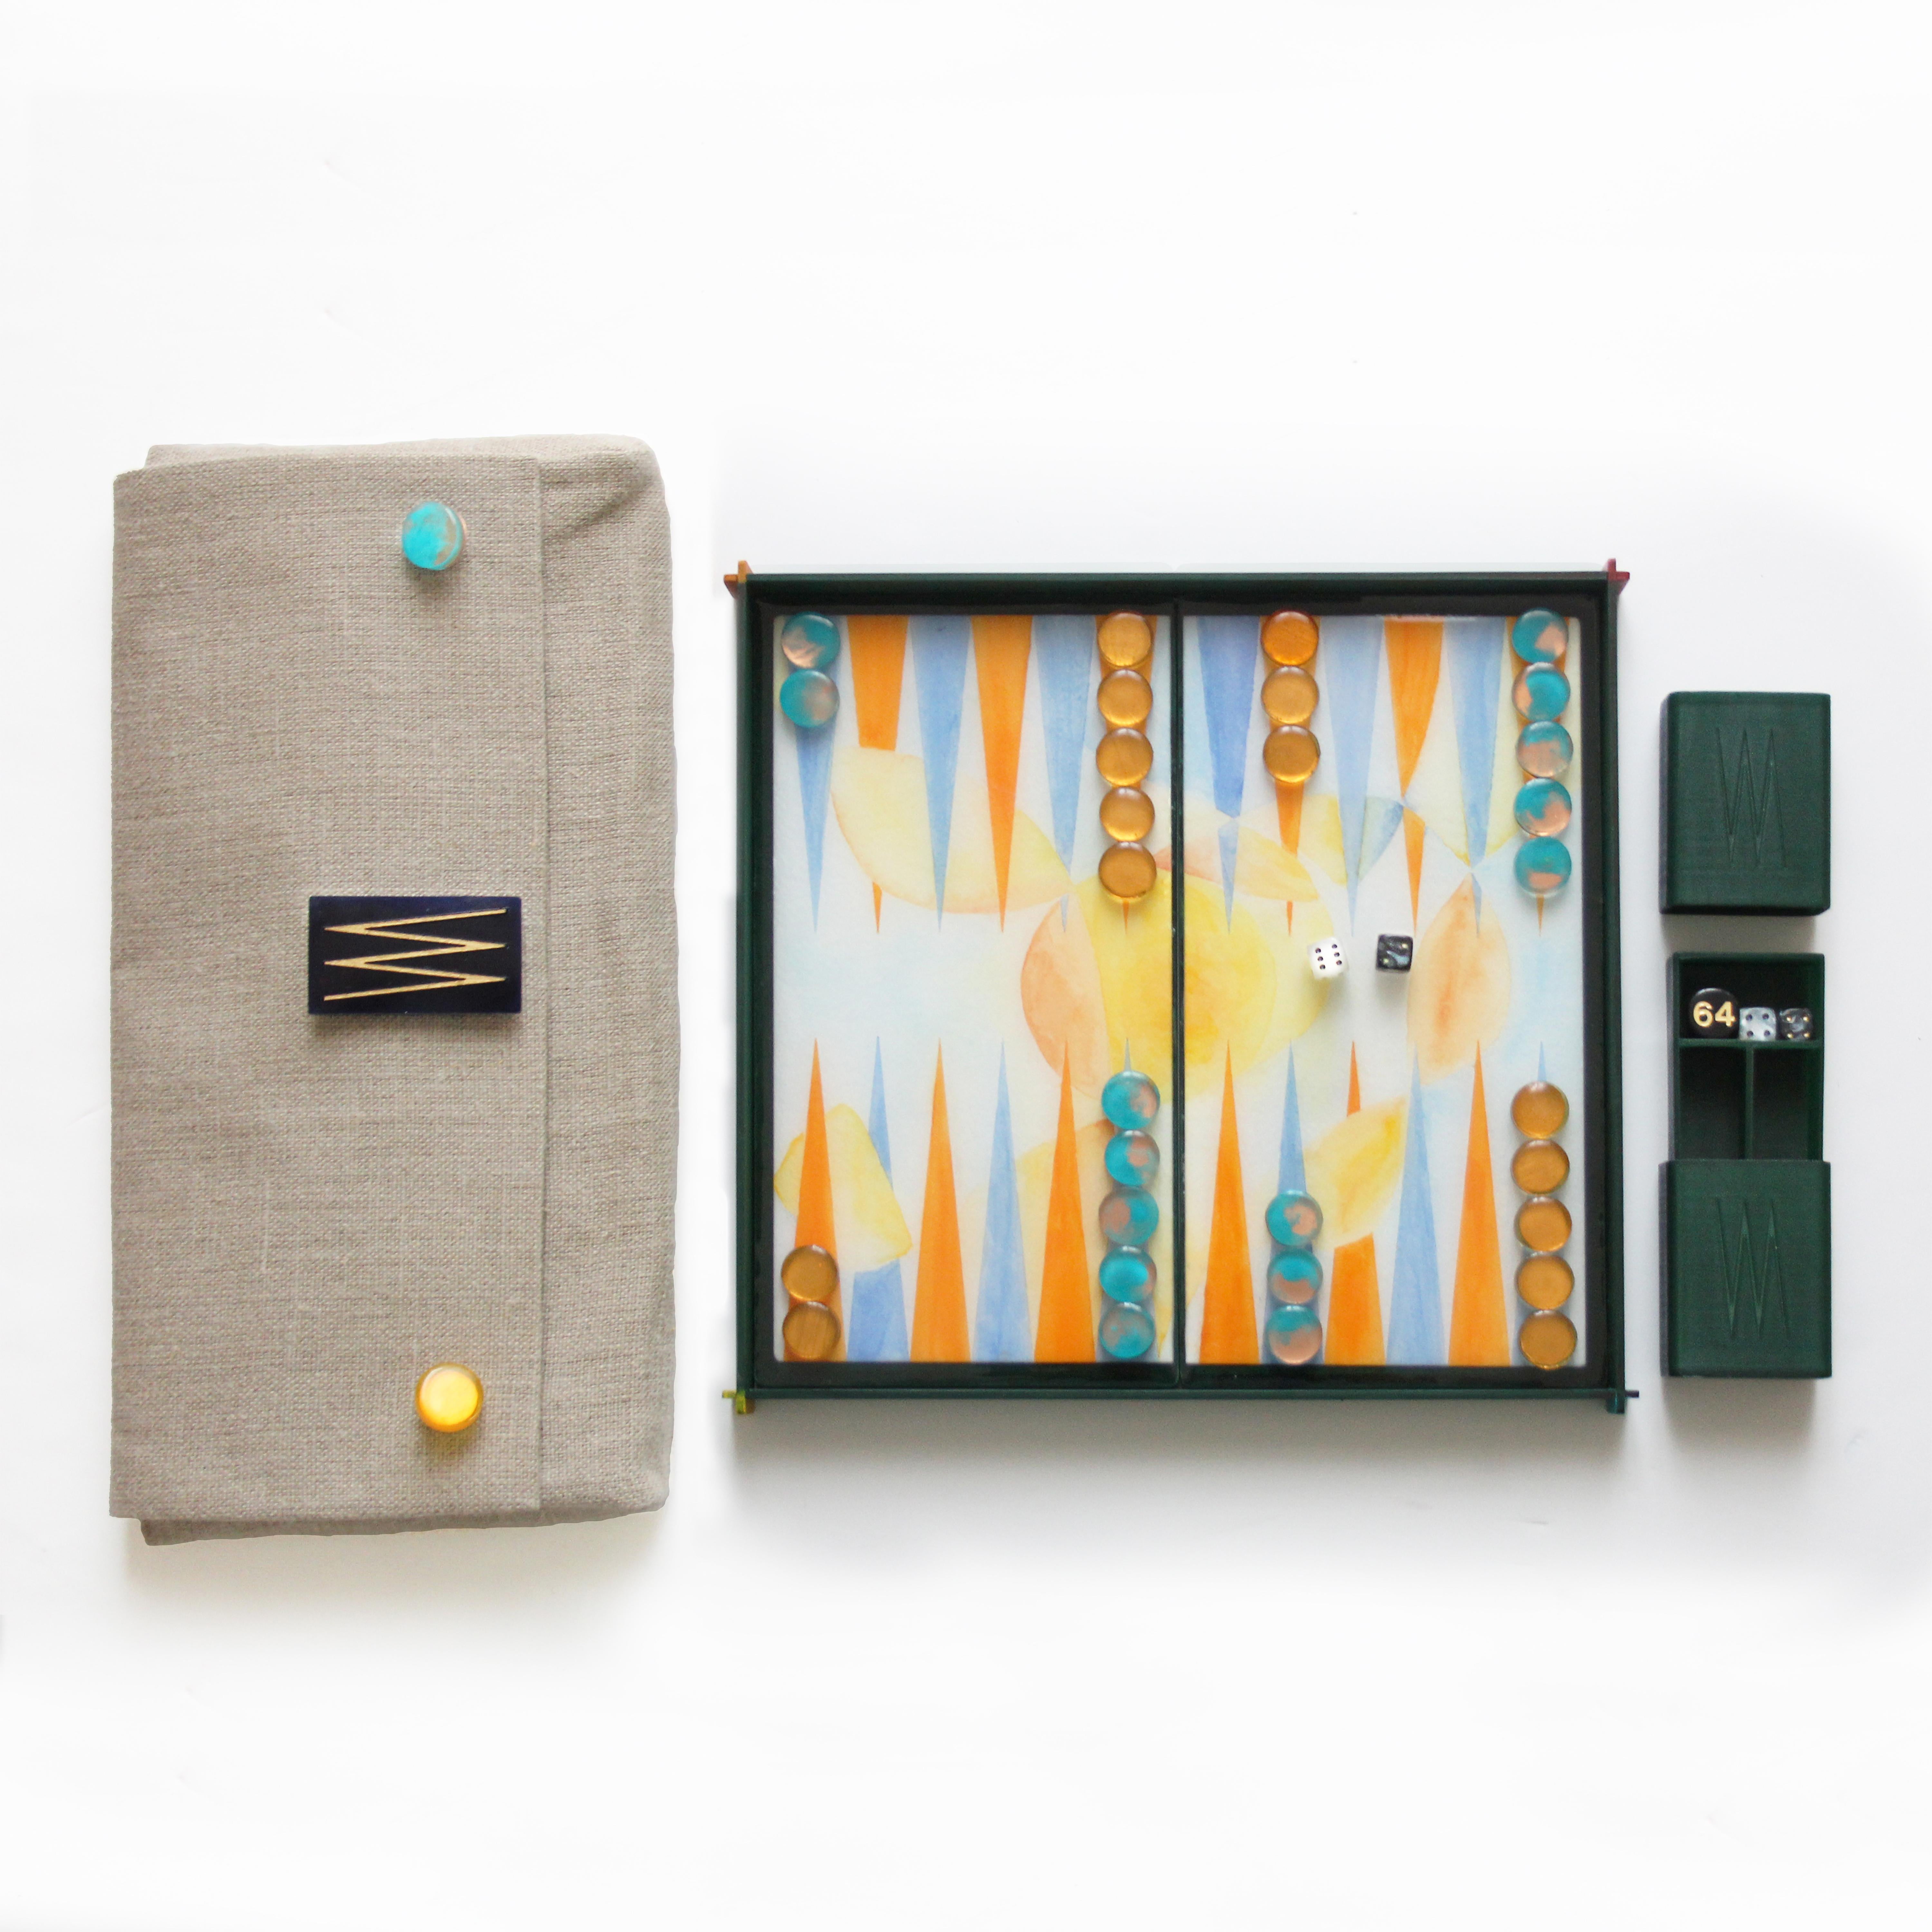 The Backgammon Board is a handmade limited edition collection (100 pieces) designed by the young Milan based Valeria Molinari for Dilmos. The project, composed of four boards inspired by the elements of water, air, fire and earth, is
born from the